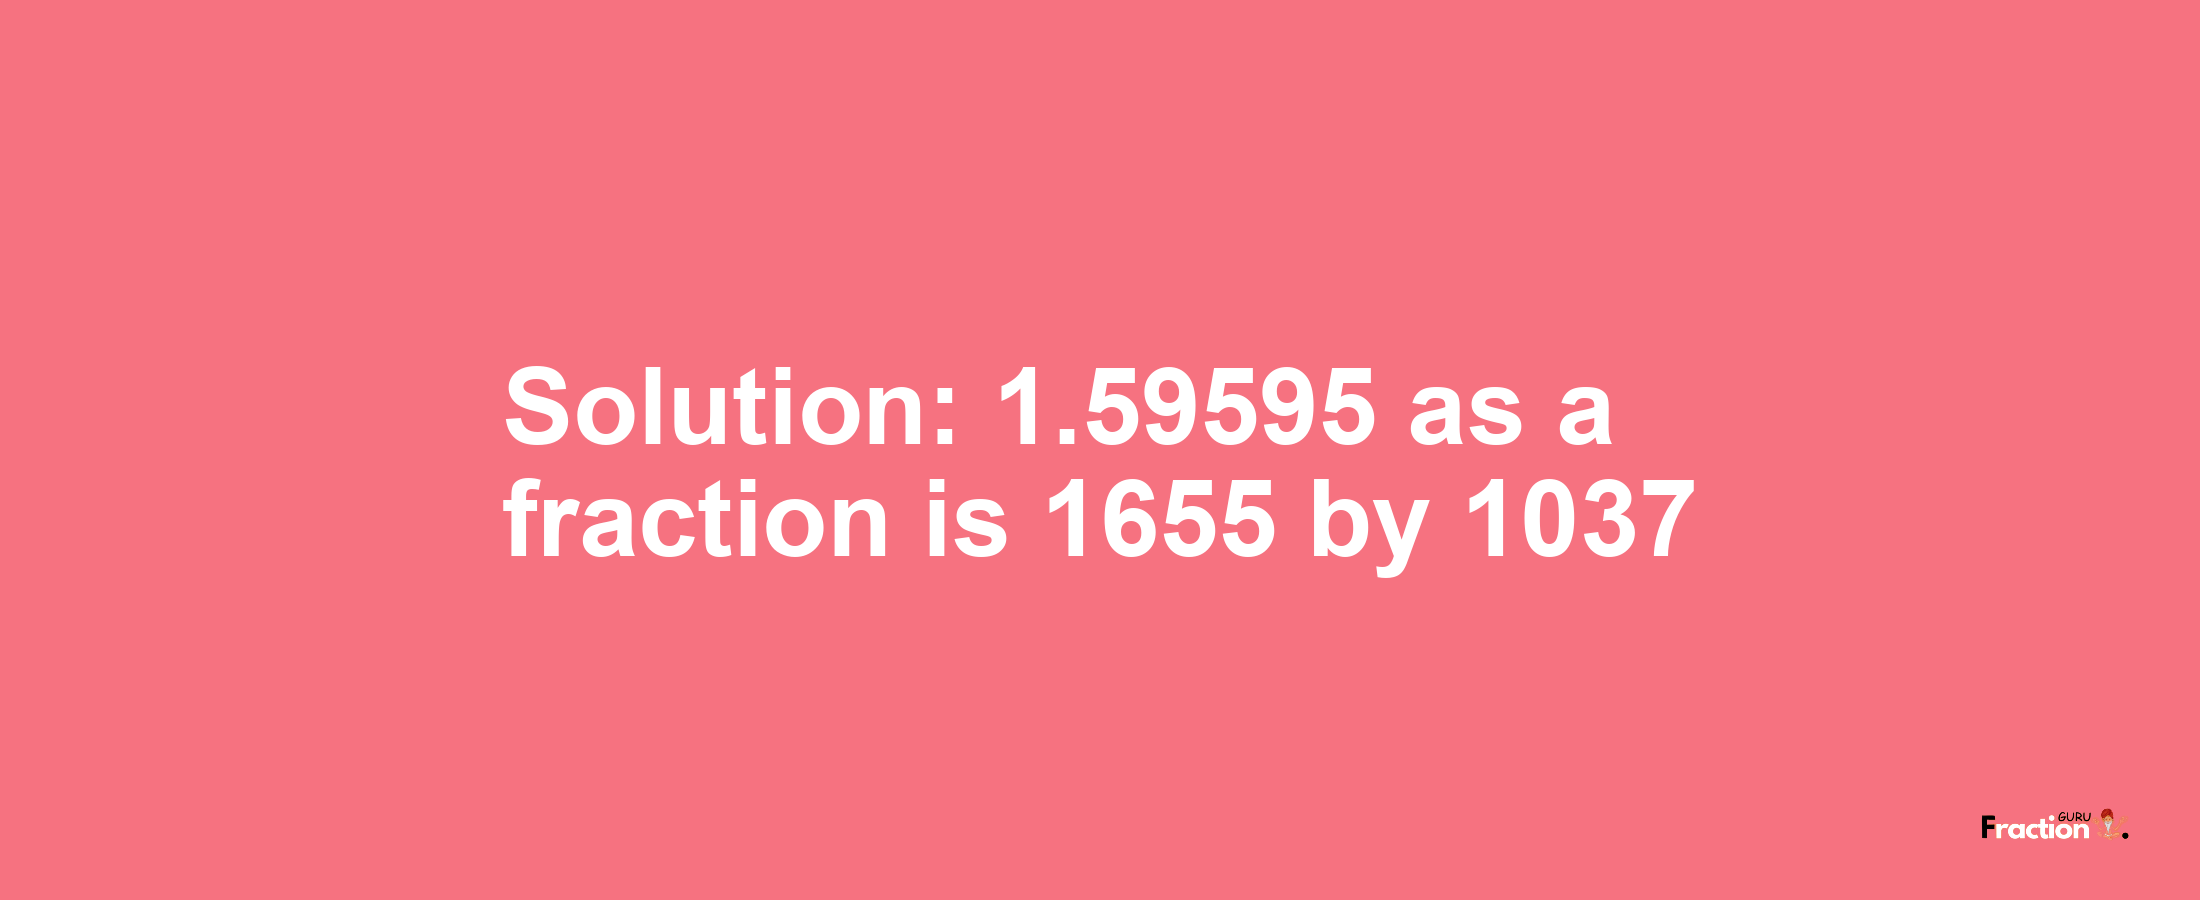 Solution:1.59595 as a fraction is 1655/1037